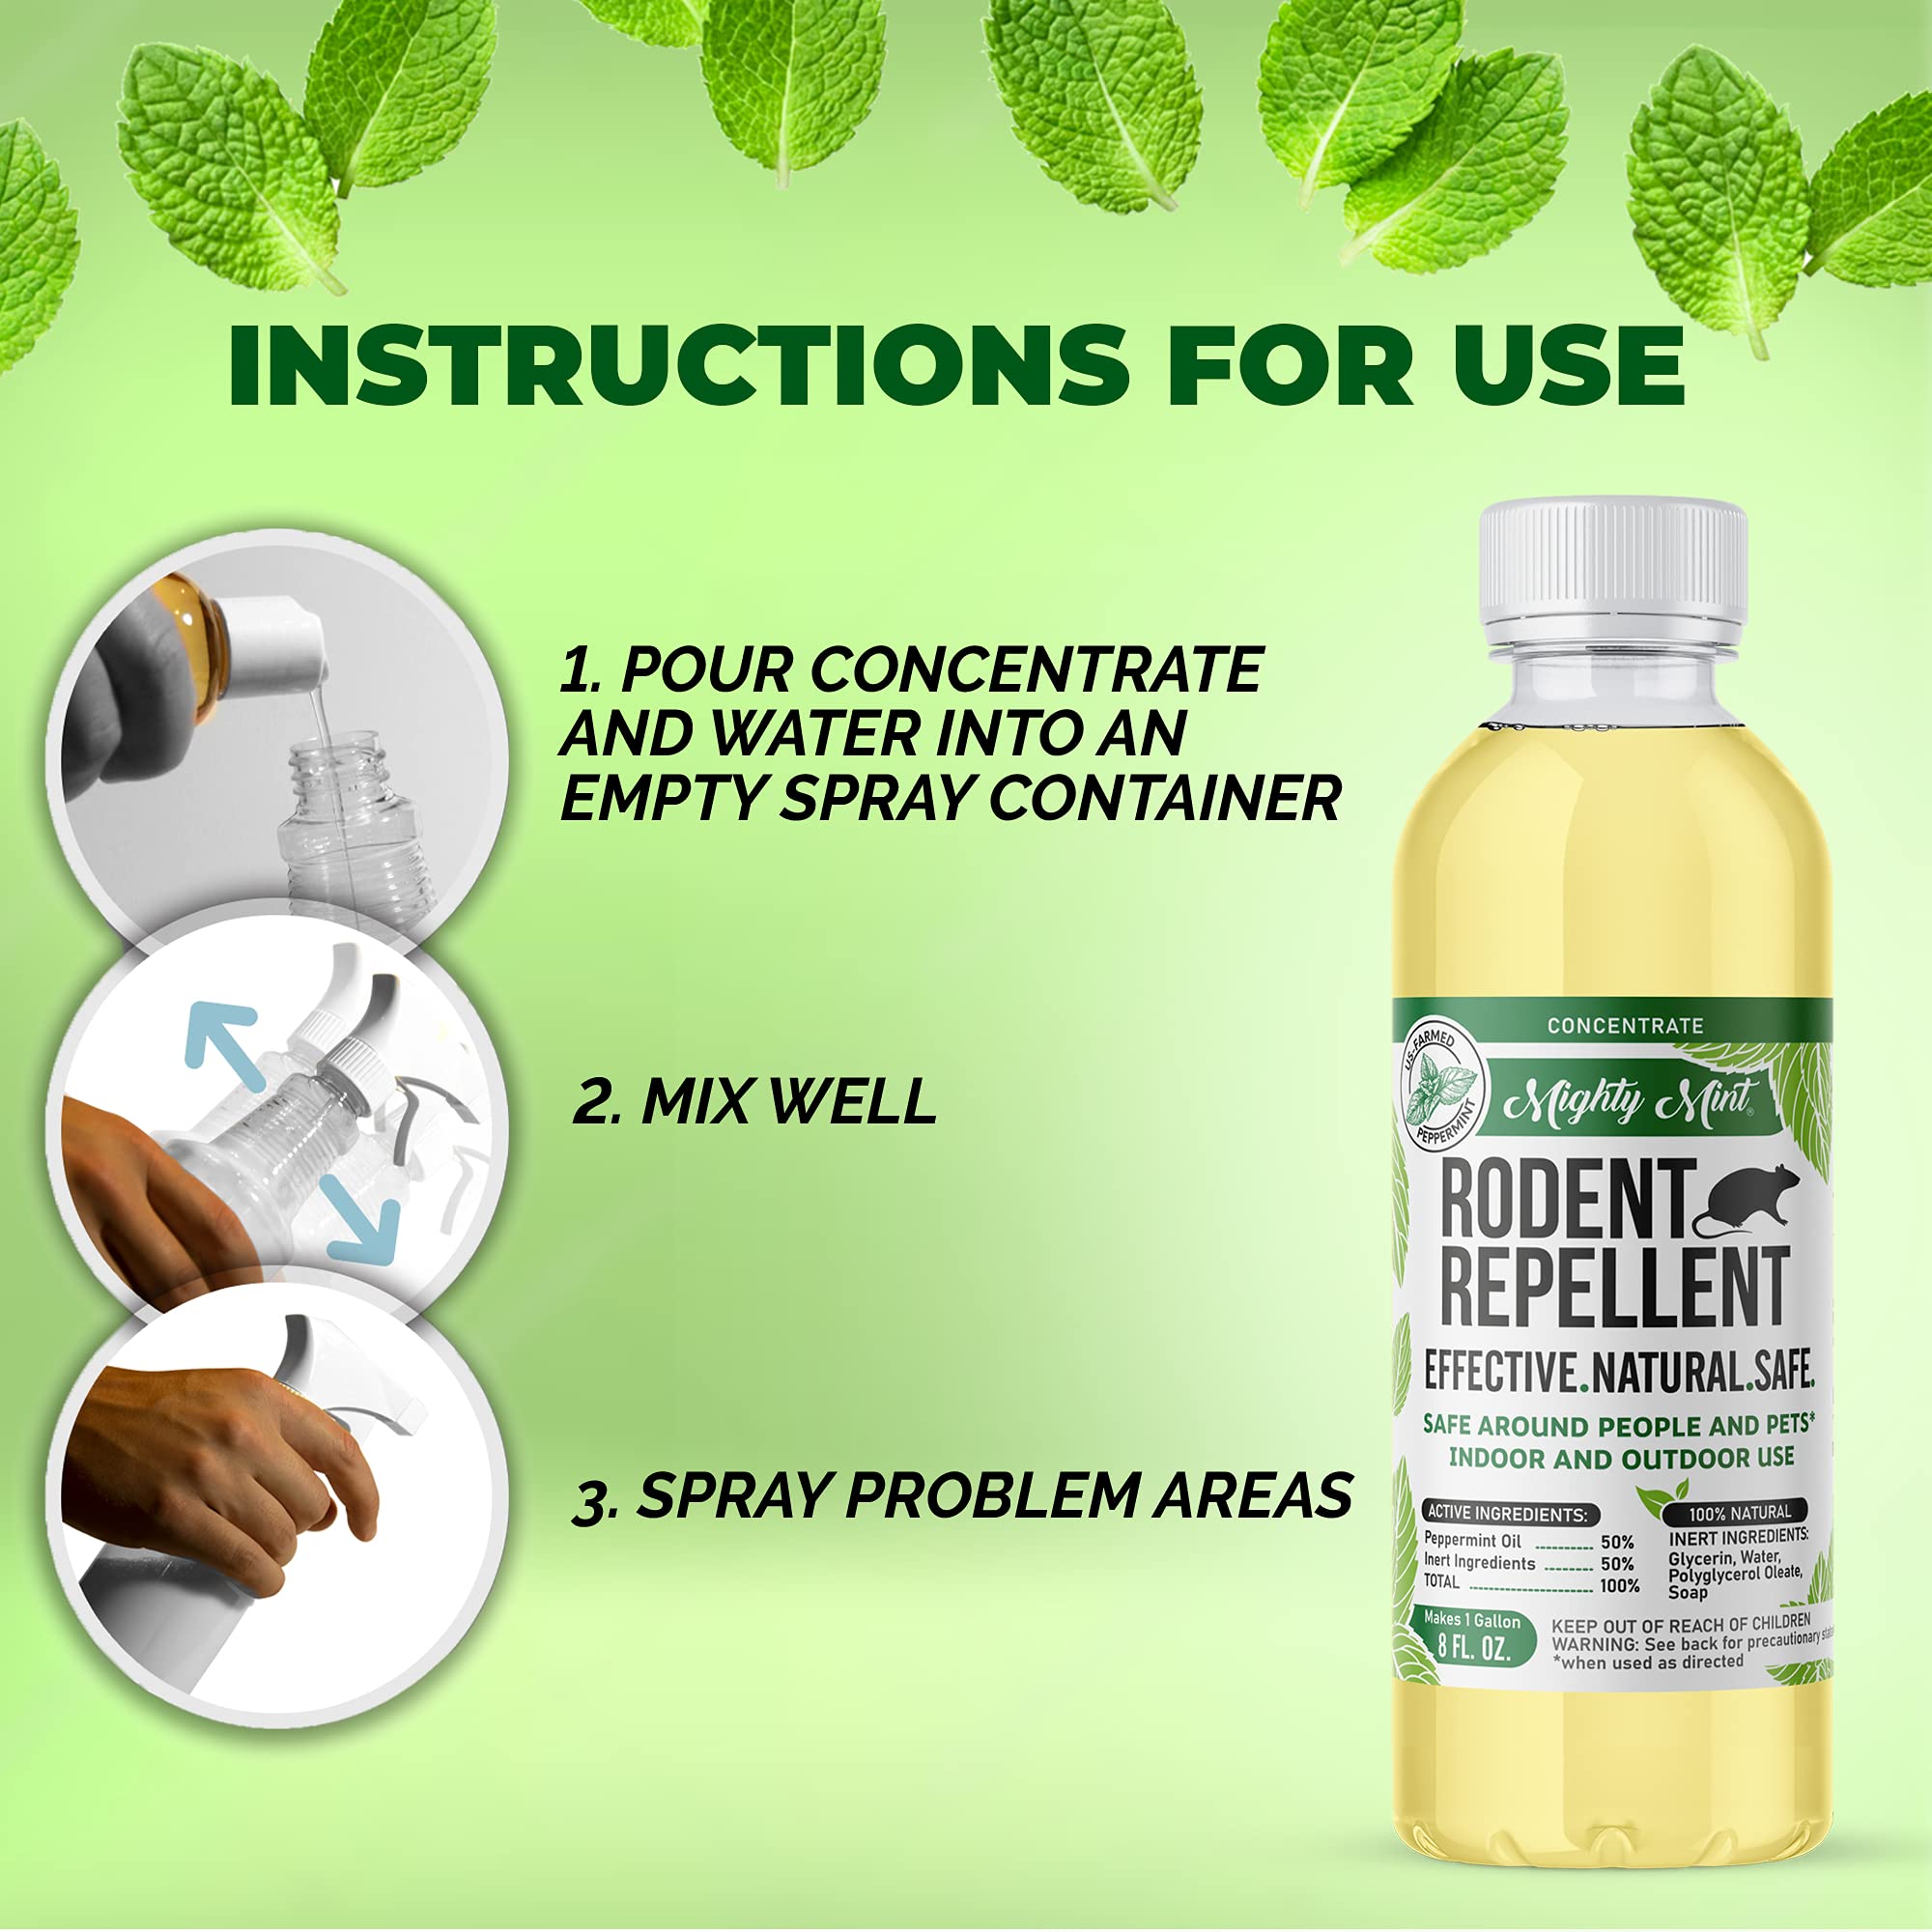 Peppermint Oil Rodent Repellent Spray and Concentrate - Makes 1 Gallon